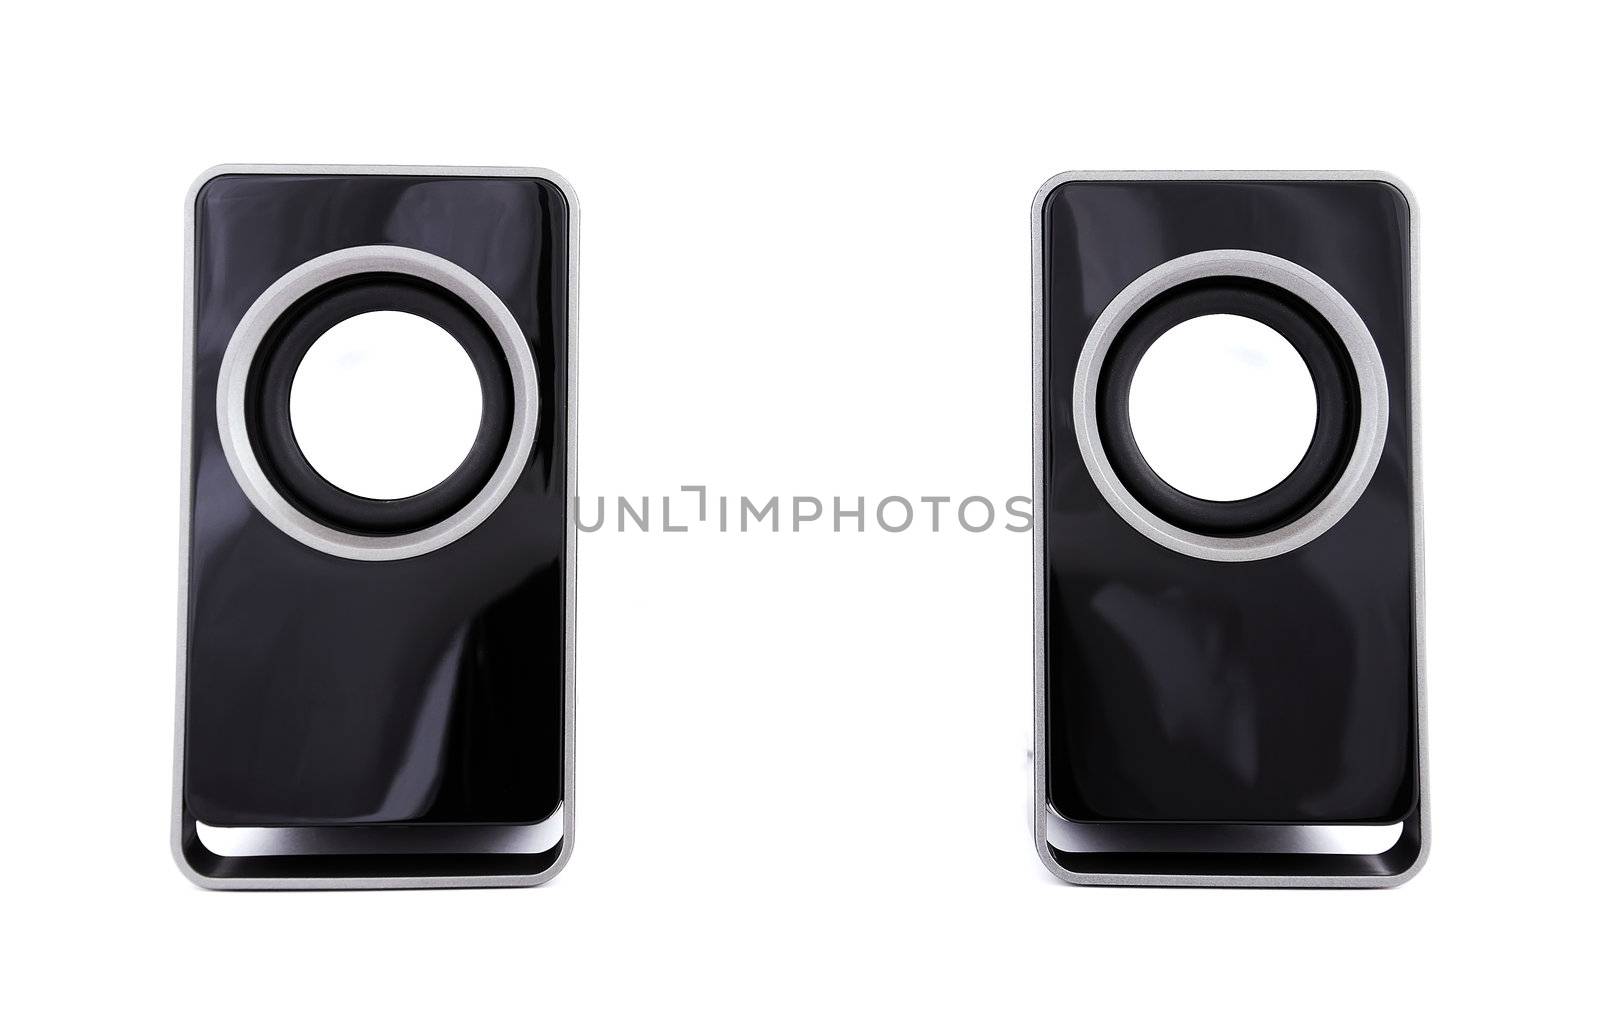 two computer speakers on a white background